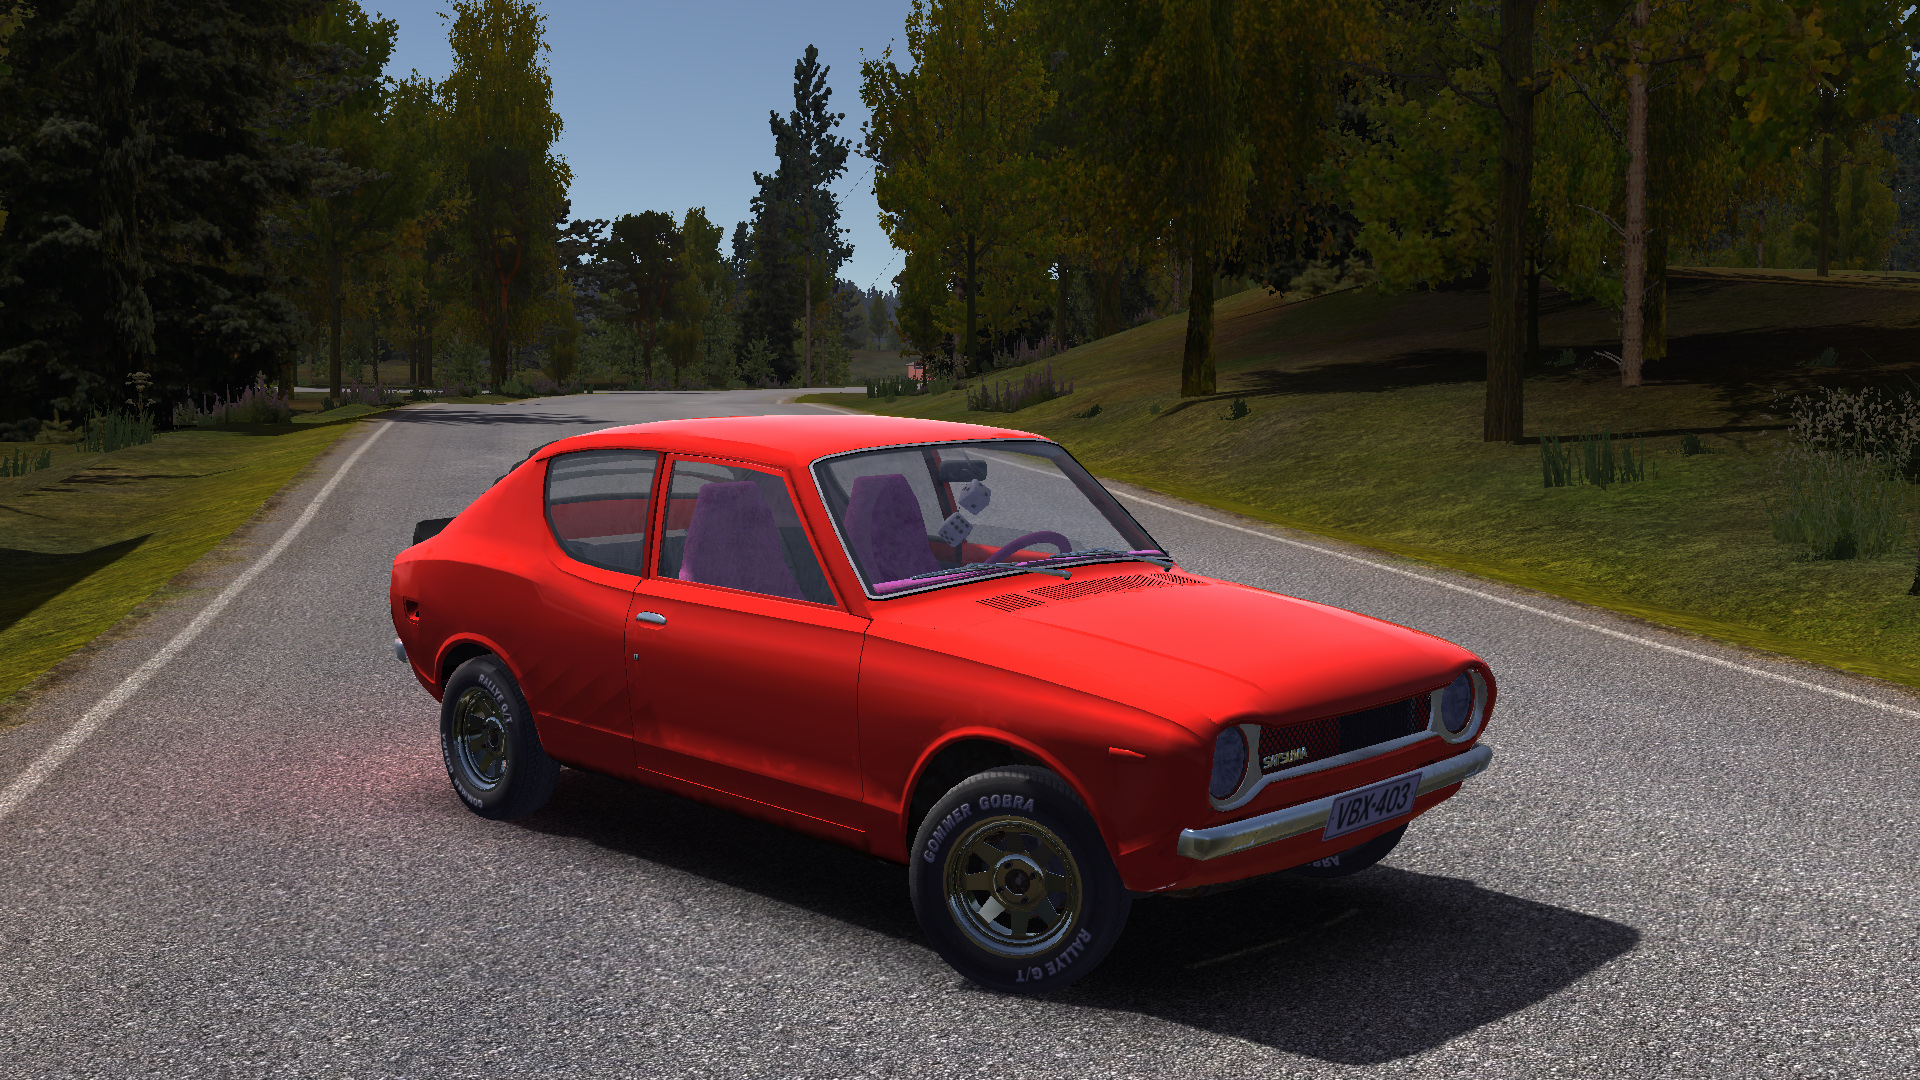 My Summer Car on X: Update is now out, including the long waited